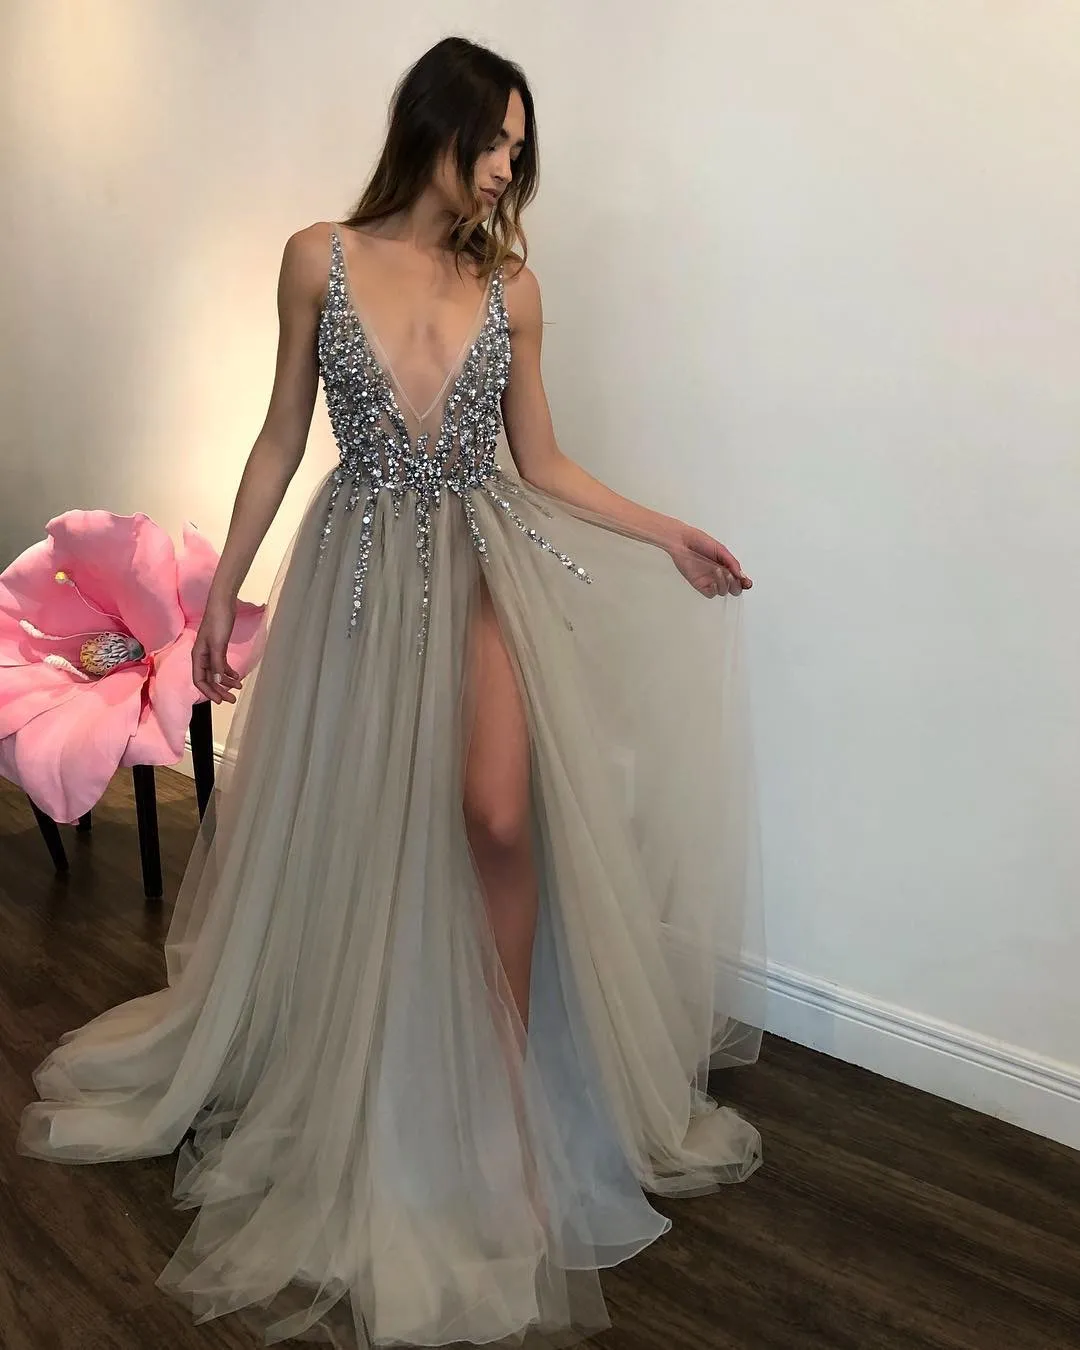 2018 Sexy Grogeous Sheer Beaded Top V-neck Eveing dress Prom dress Long Sliver Sequin Beads Mix Tulle Party Dress Backless Spl206Z